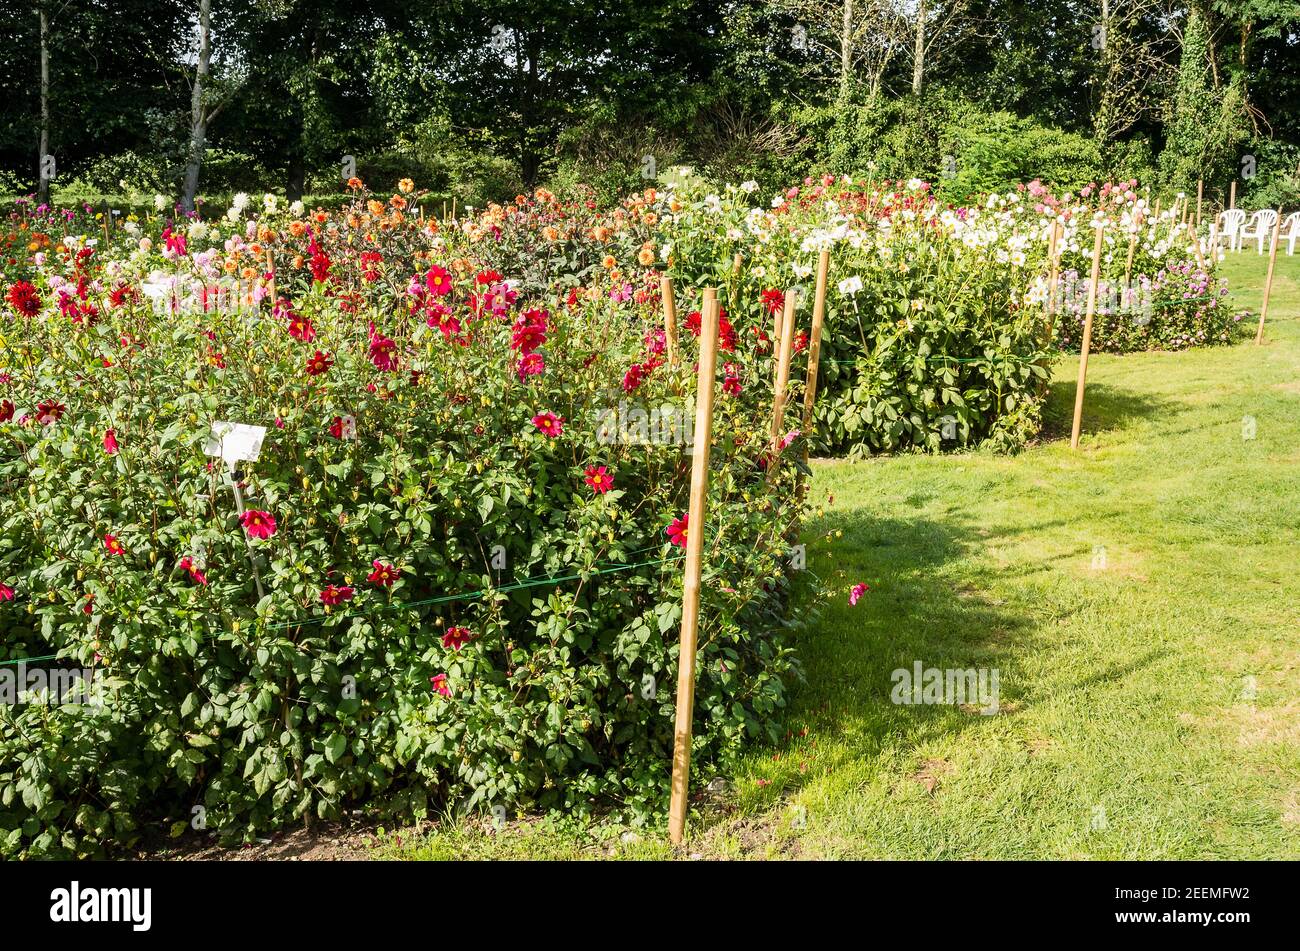 Part of the display field at Gilberts Dahlia nursery in Hampshire UK in September. The prominent red flowers are Dahlia Coccinea. Stock Photo